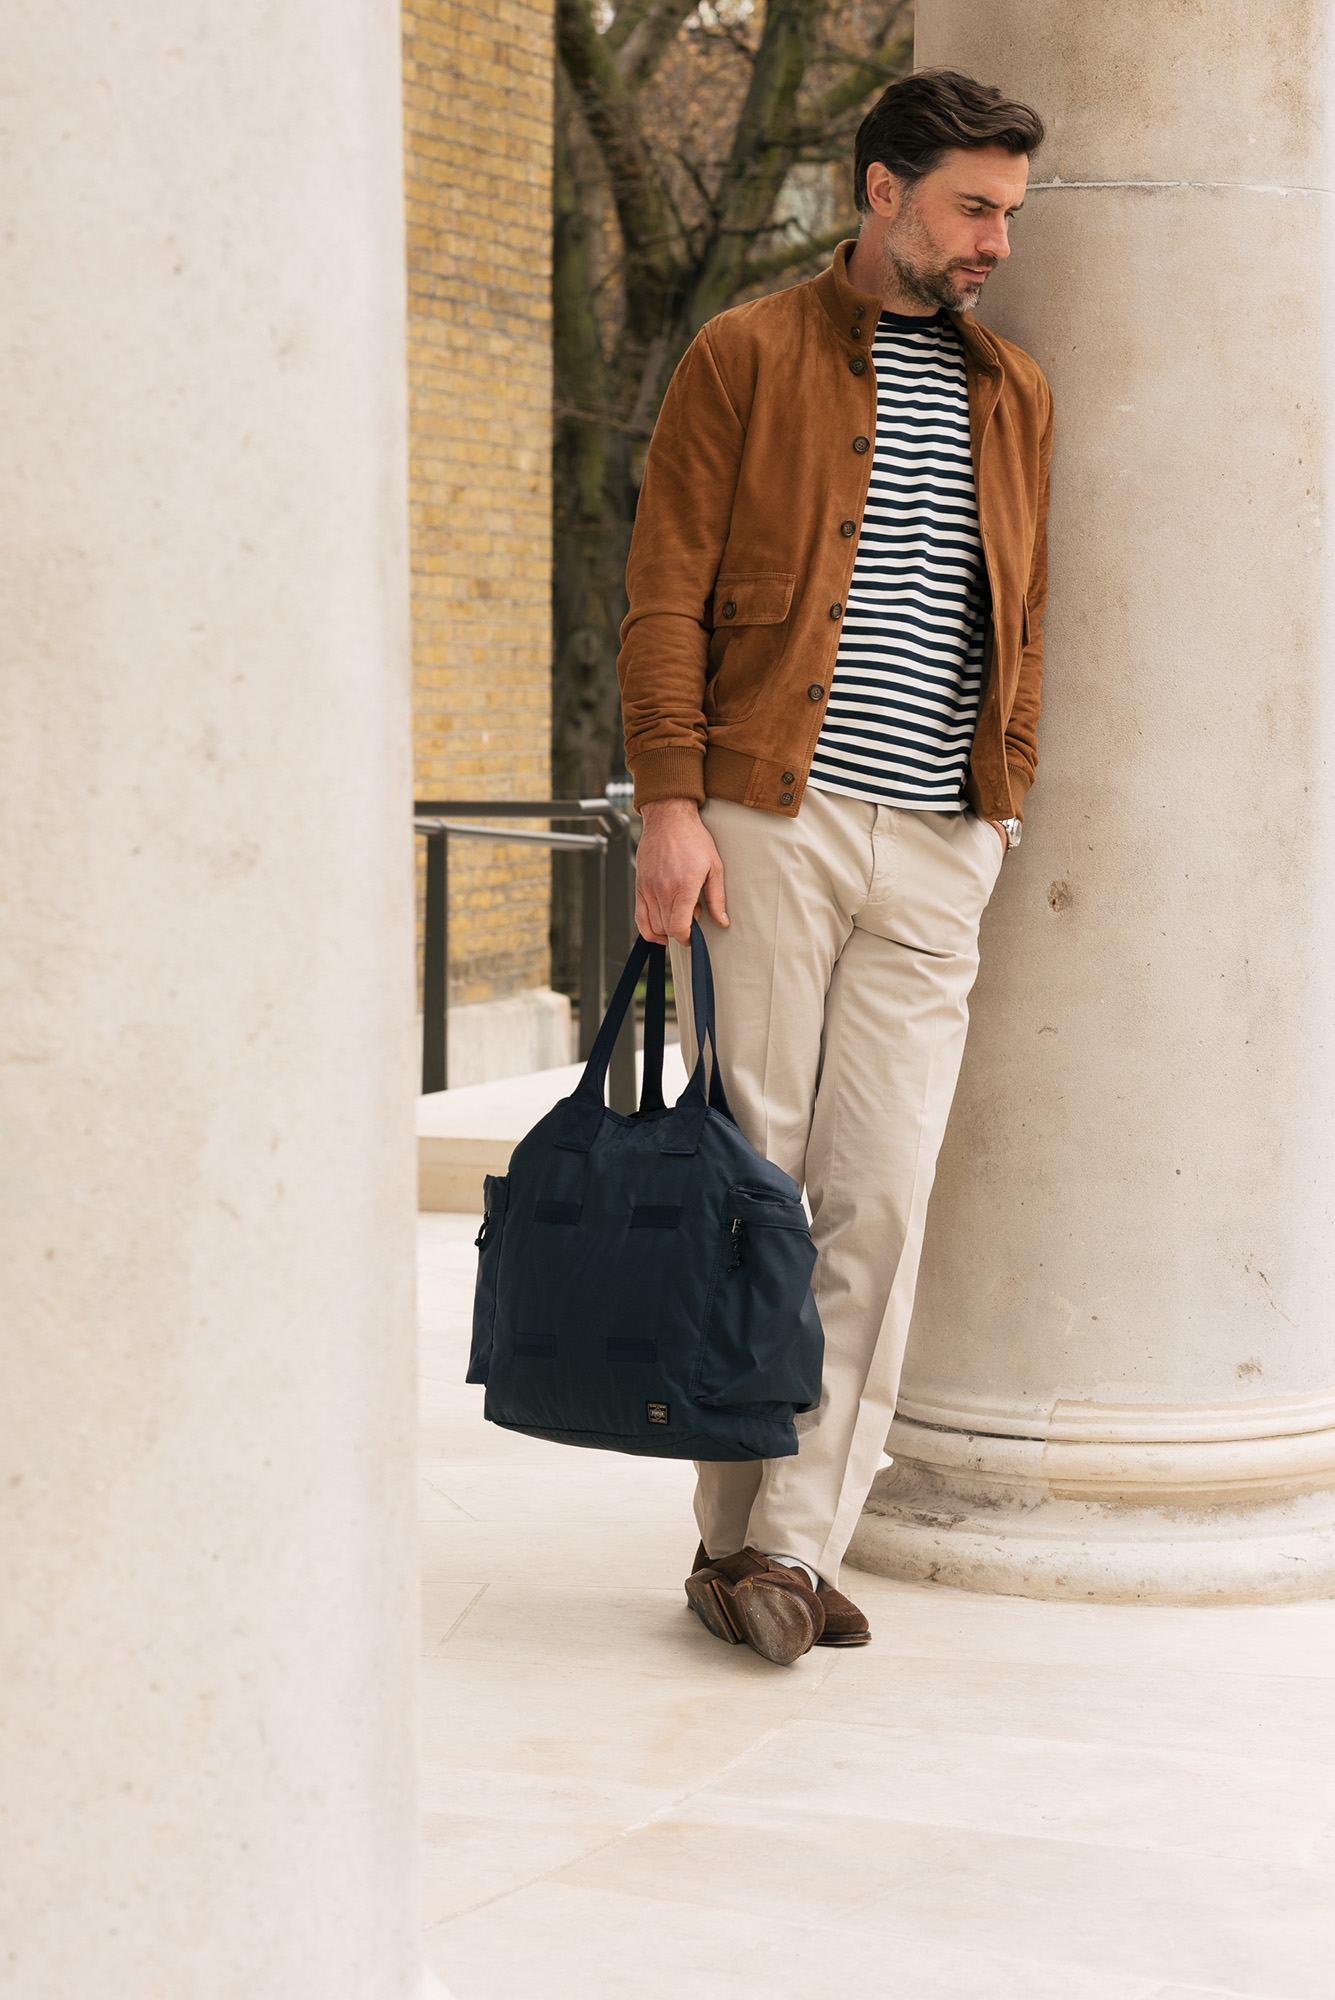 Man outside wearing Valstarino jacket and carrying a navy holdall